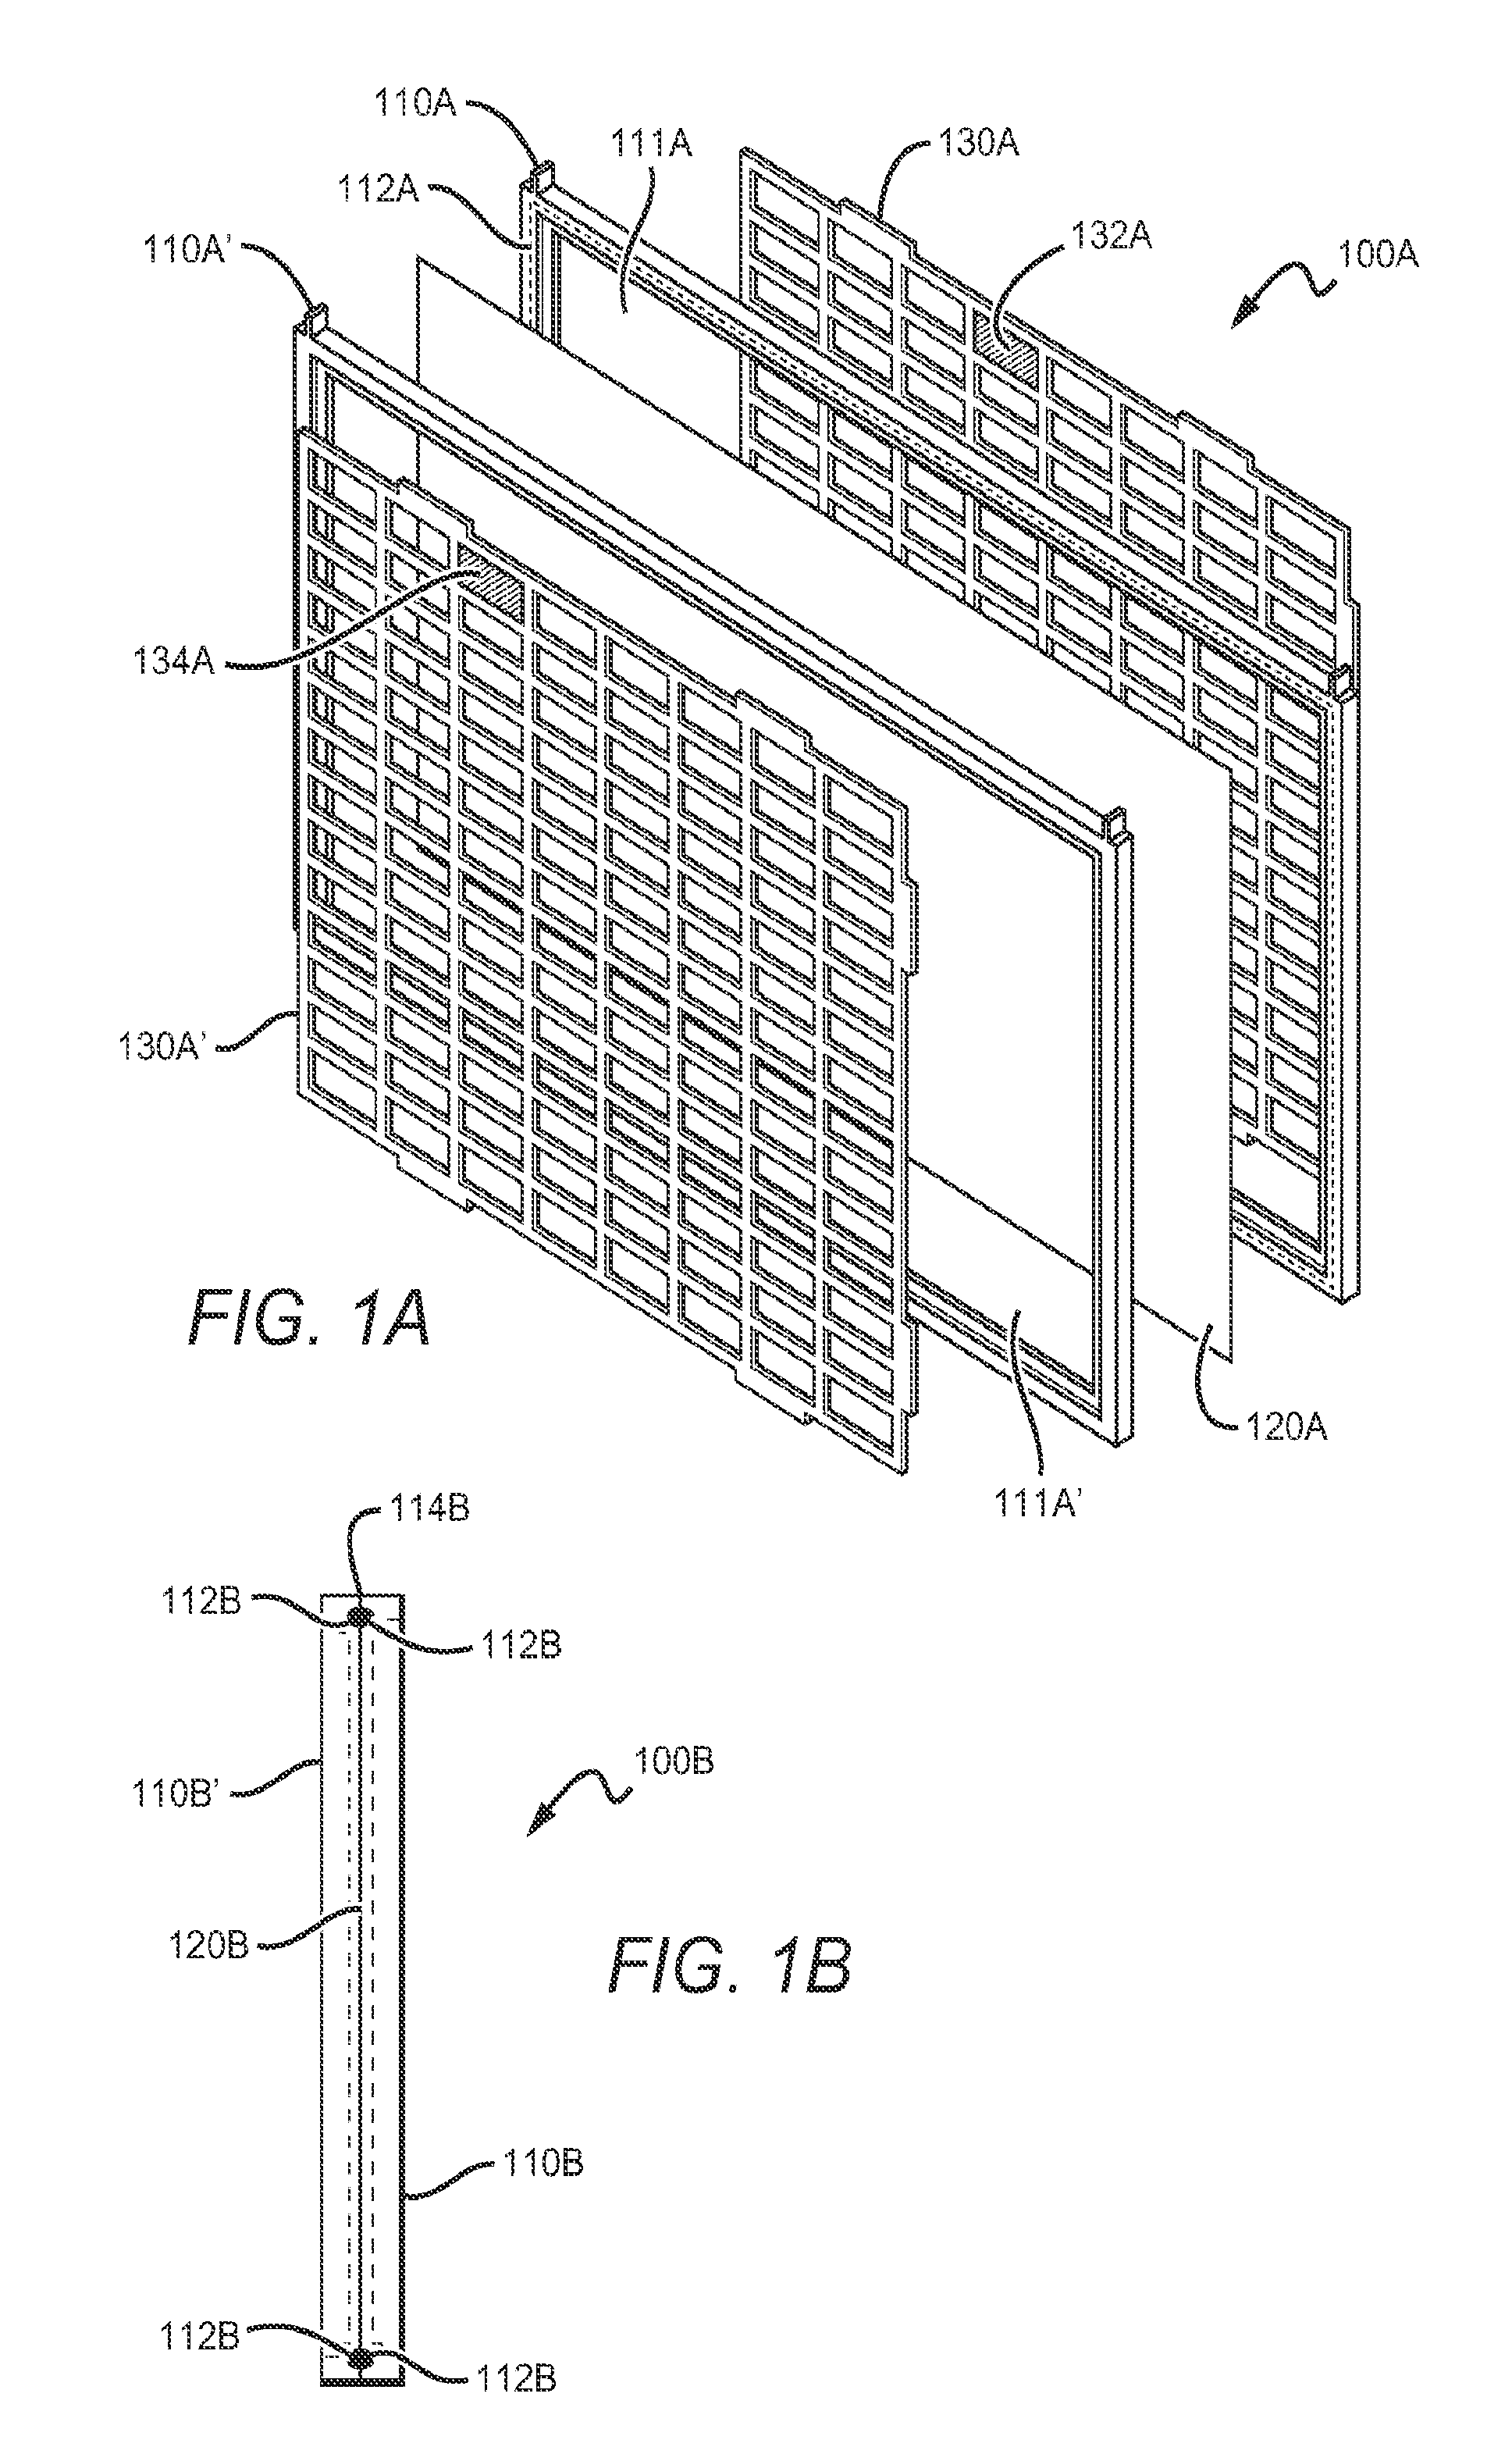 Light-Weight Bipolar Valve Regulated Lead Acid Batteries and Methods Therefor